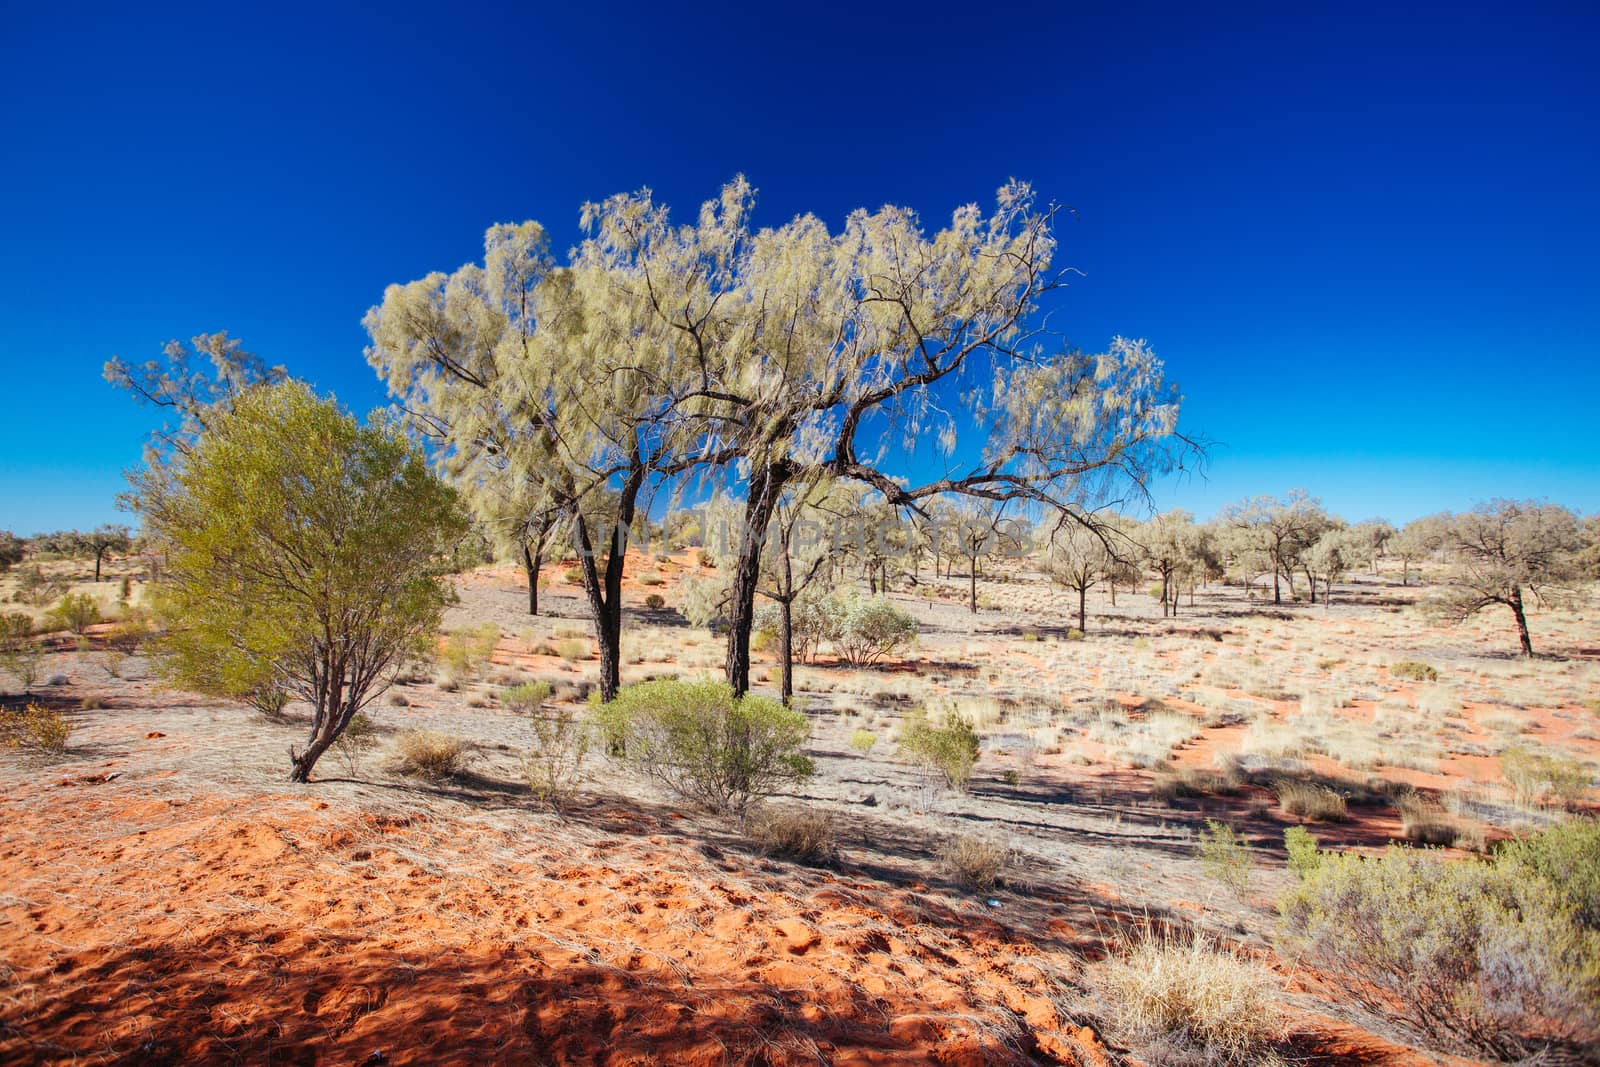 Outback landscape and red sand near Kings Canyon in the Northern Territory, Australia